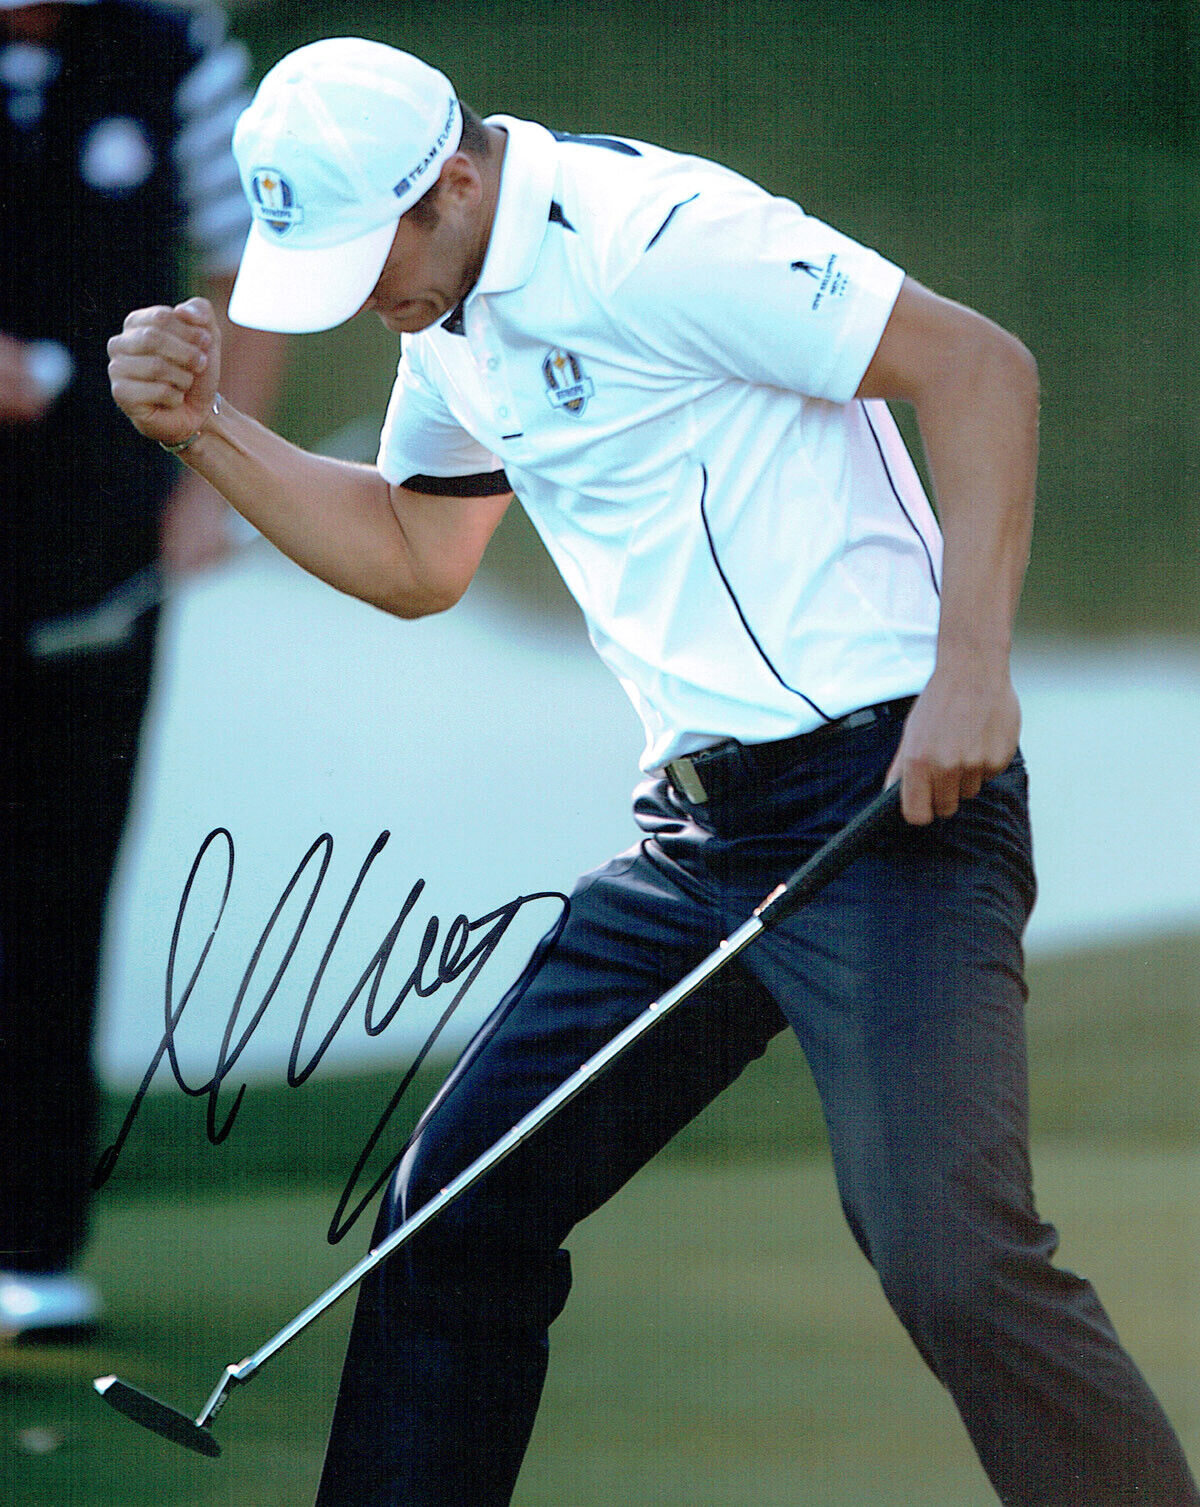 Martin KAYMER SIGNED Autograph 10x8 Photo Poster painting AFTAL COA Europe Ryder Cup Winning Put